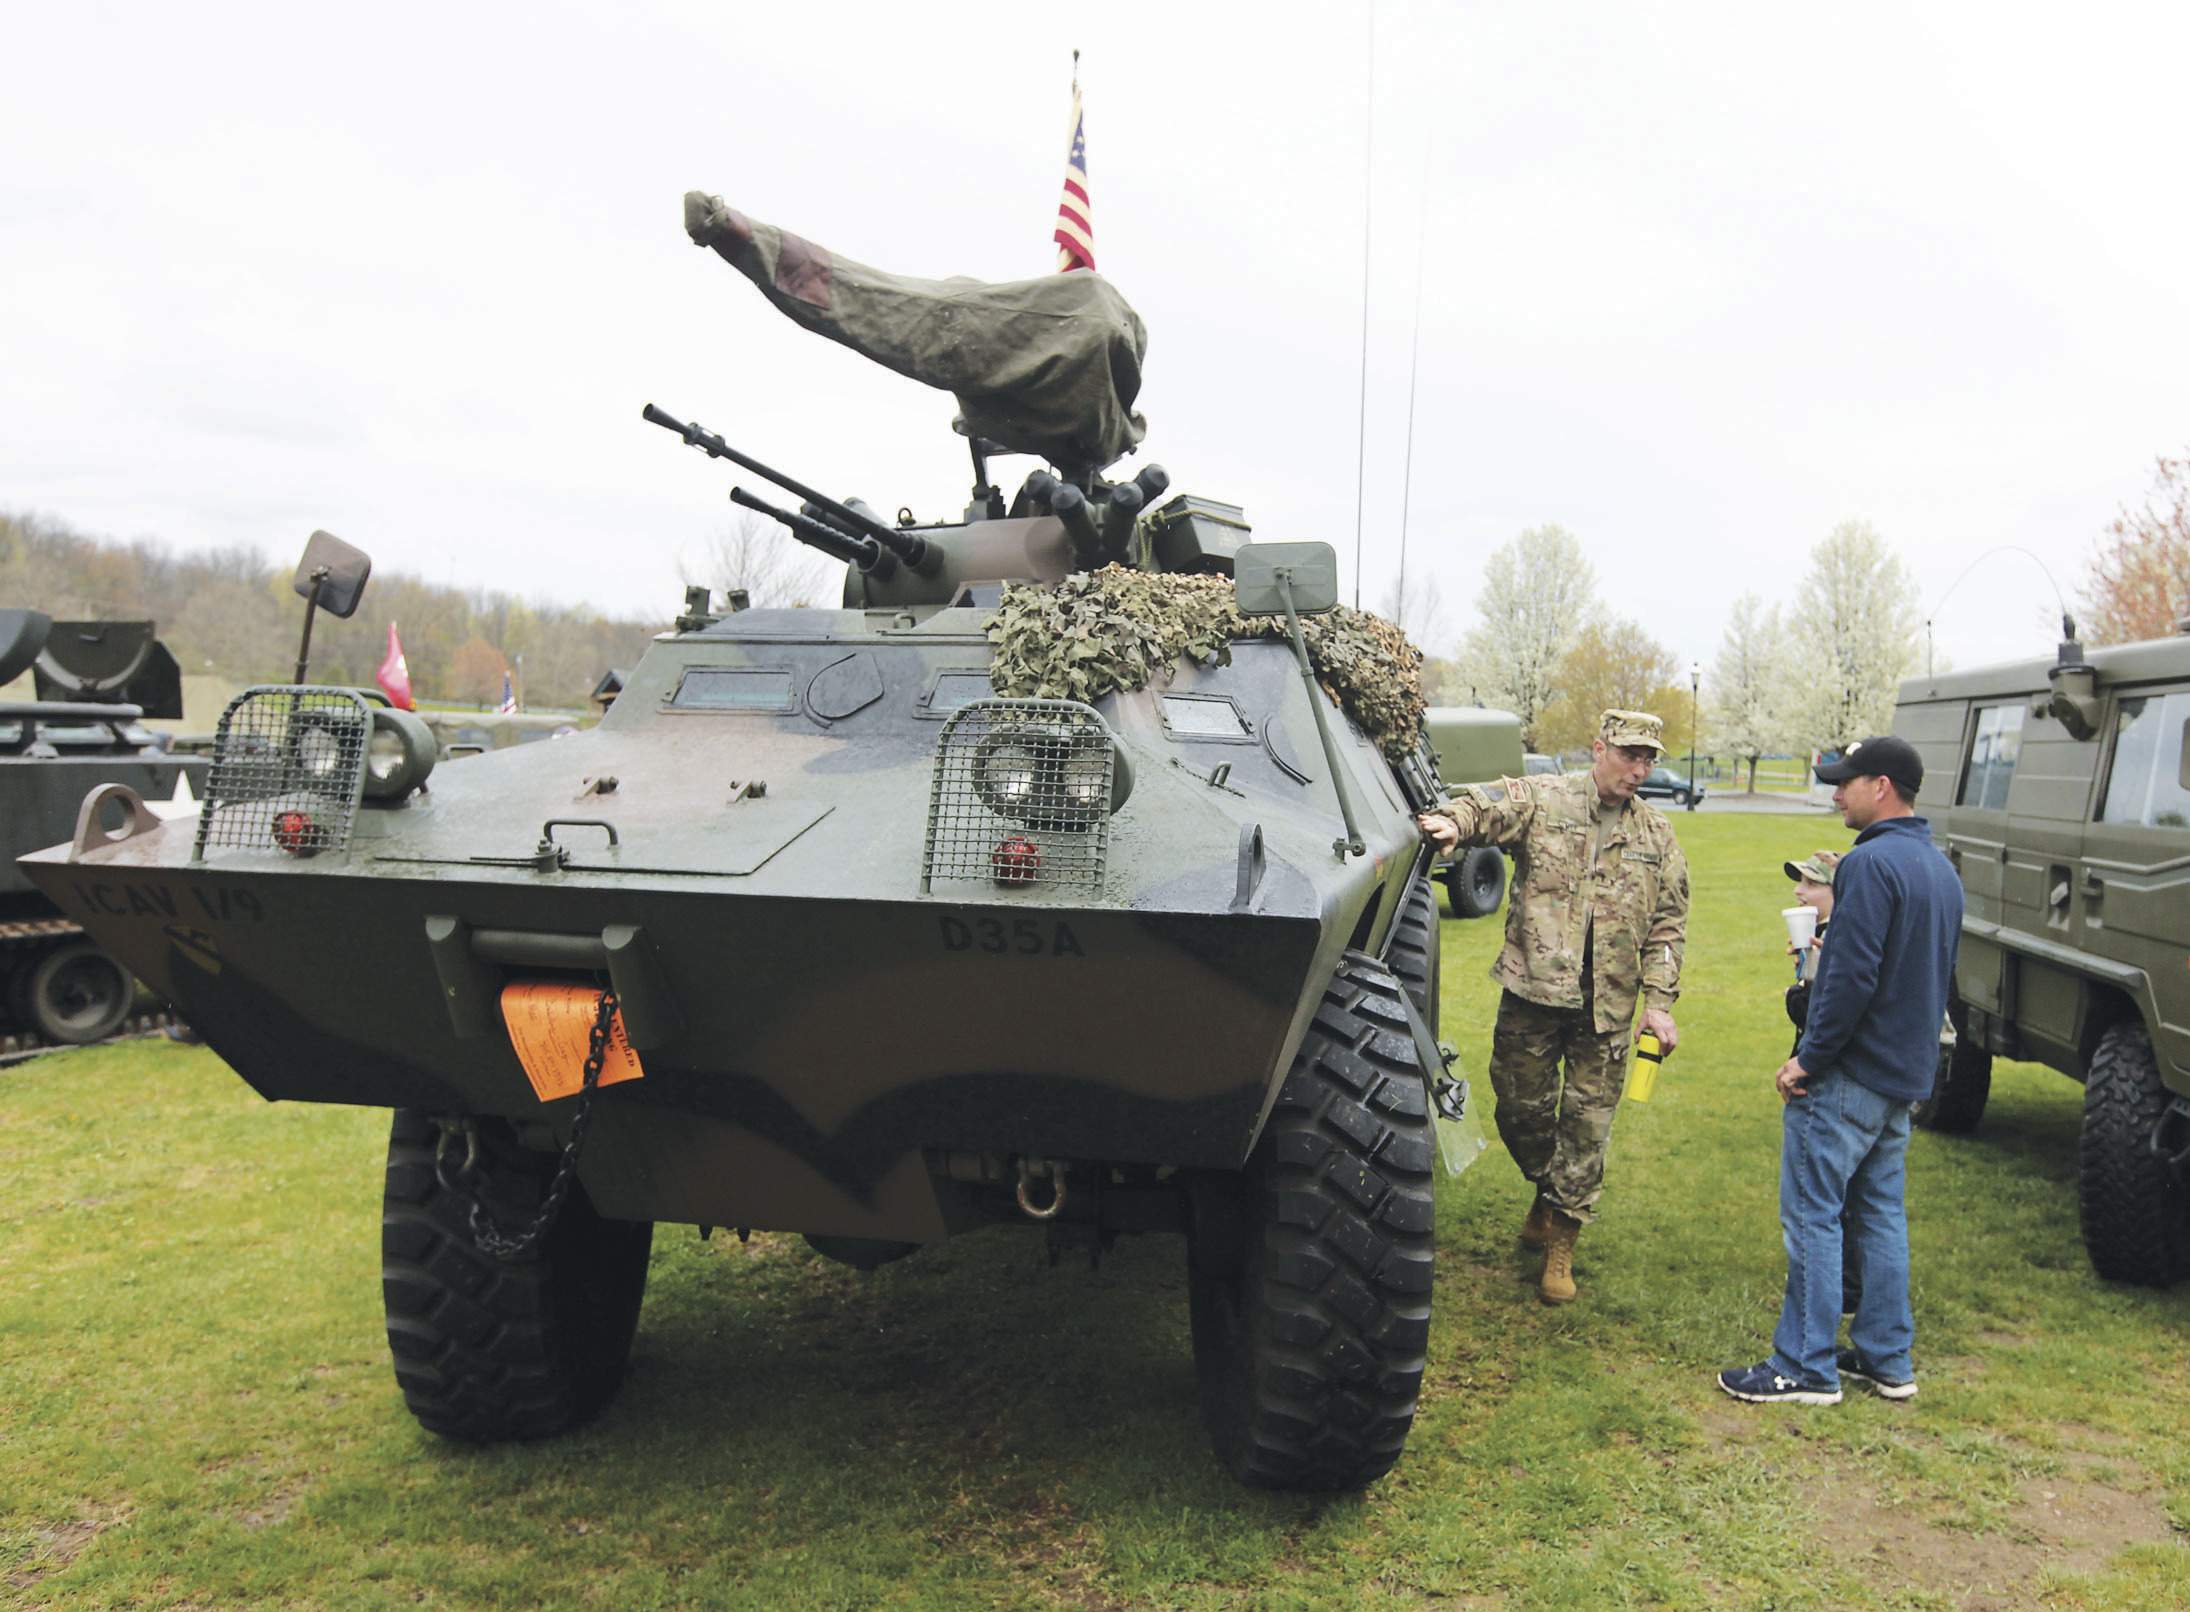 Military vehicles on display - New Jersey Herald -